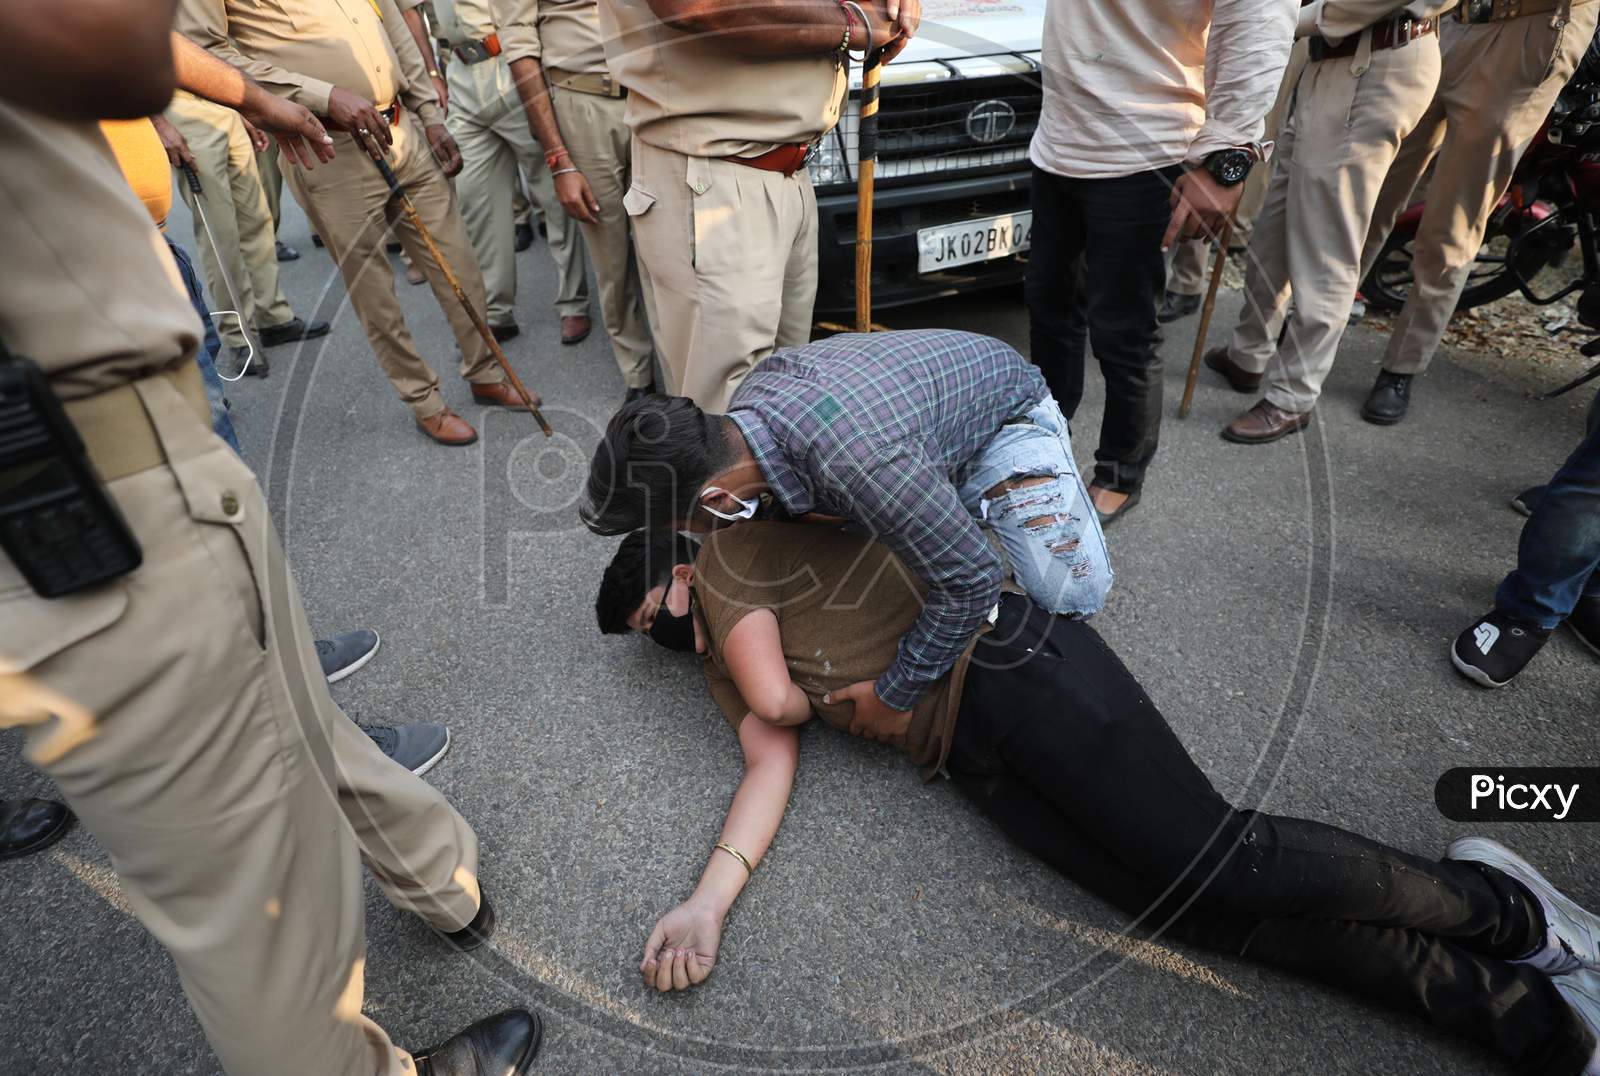 Police attempt to detain ABVP activists trying to hoist the Tricolor at PDP headquarters, in Jammu,, Oct. 25, 2020.